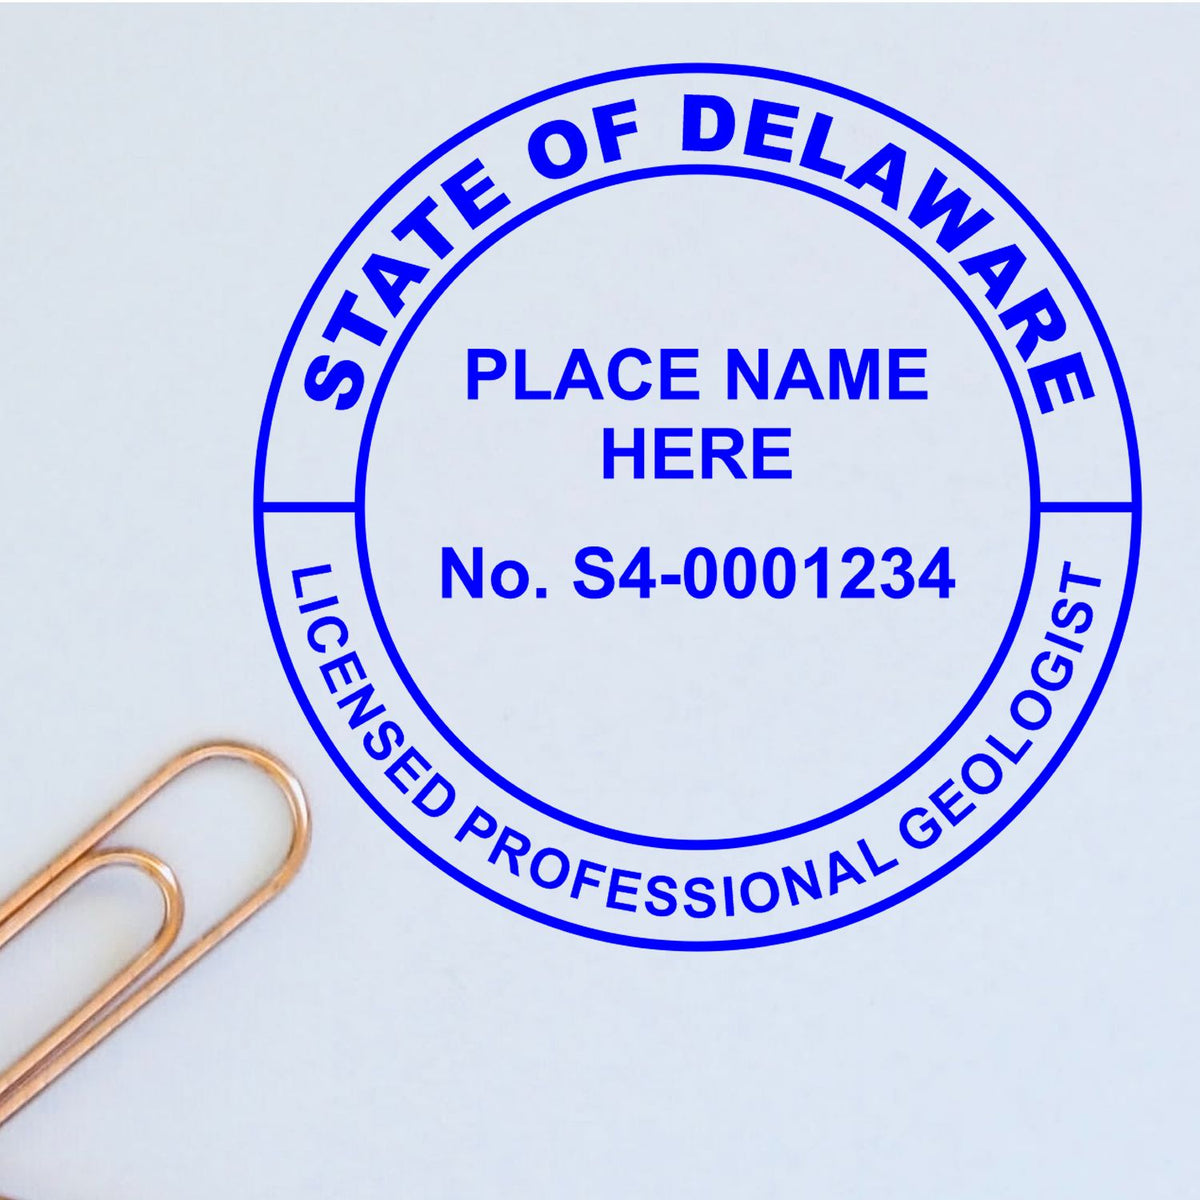 The Slim Pre-Inked Delaware Professional Geologist Seal Stamp  impression comes to life with a crisp, detailed image stamped on paper - showcasing true professional quality.